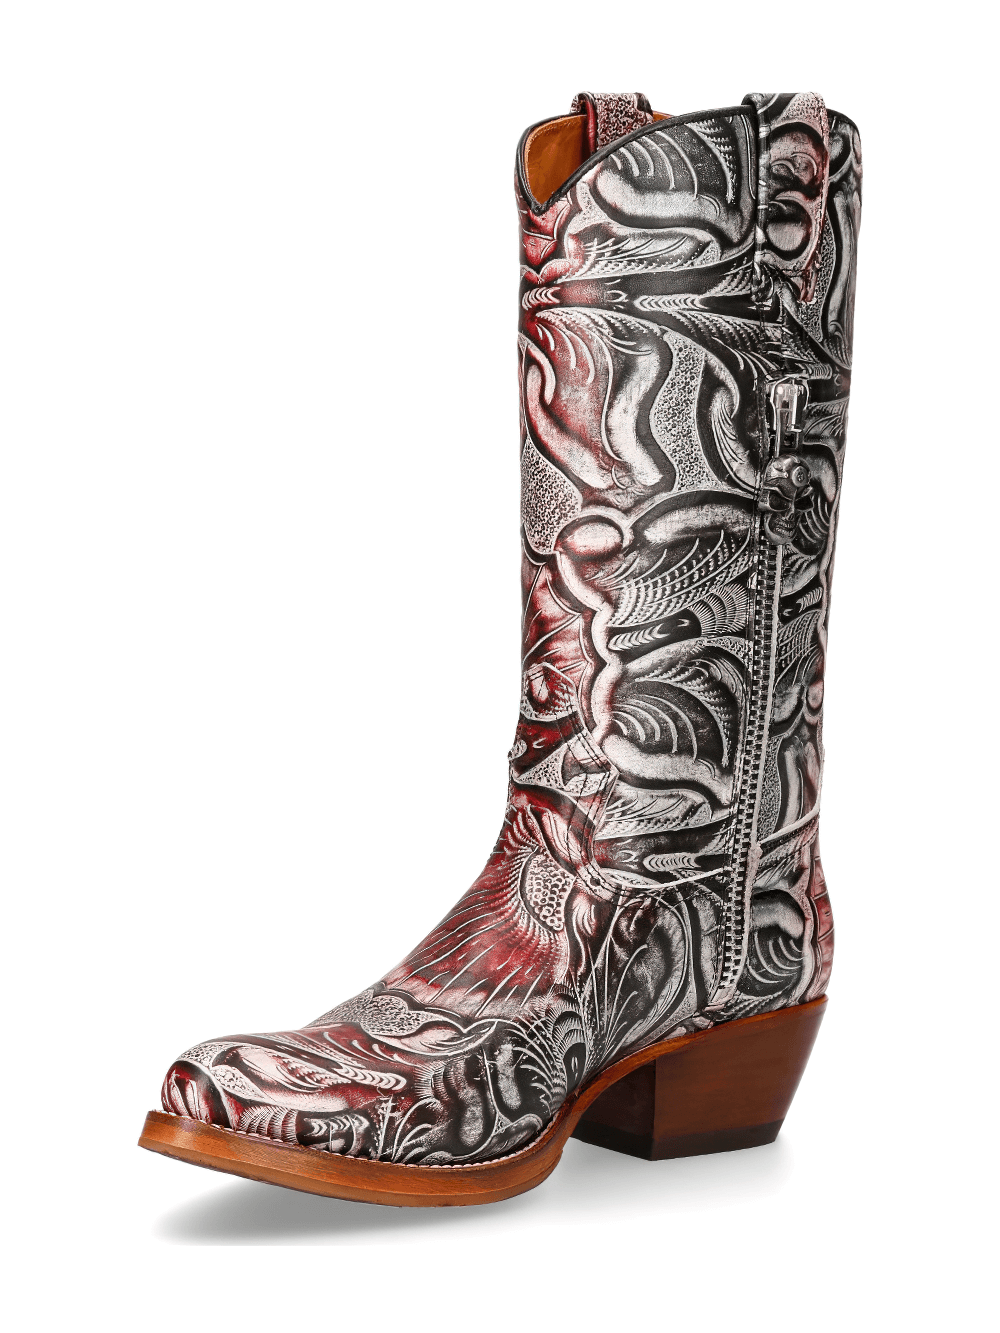 NEW ROCK Exotic Red and Silver Carved Leather Biker Boots